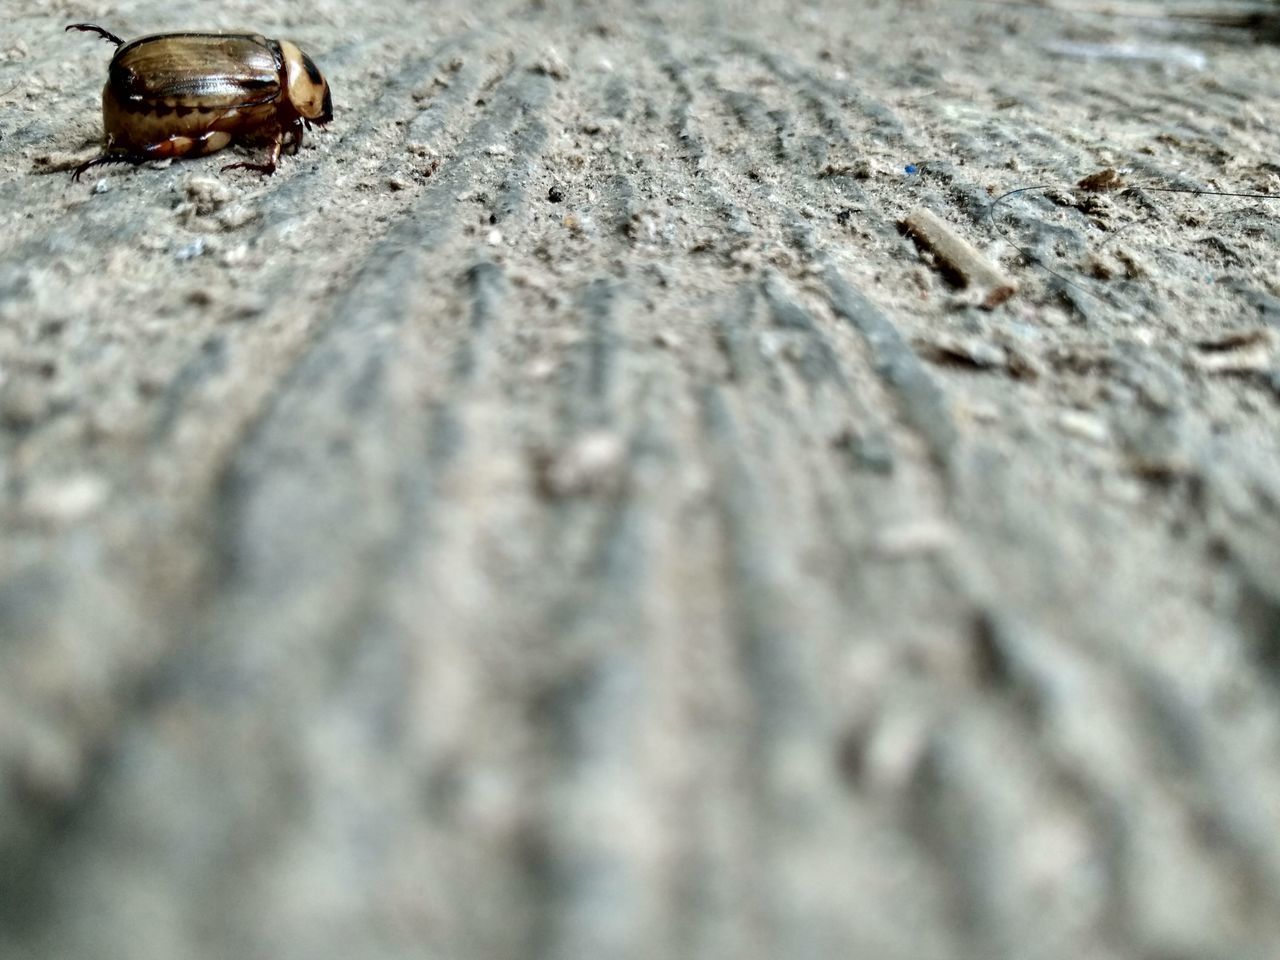 CLOSE-UP OF INSECT ON GROUND